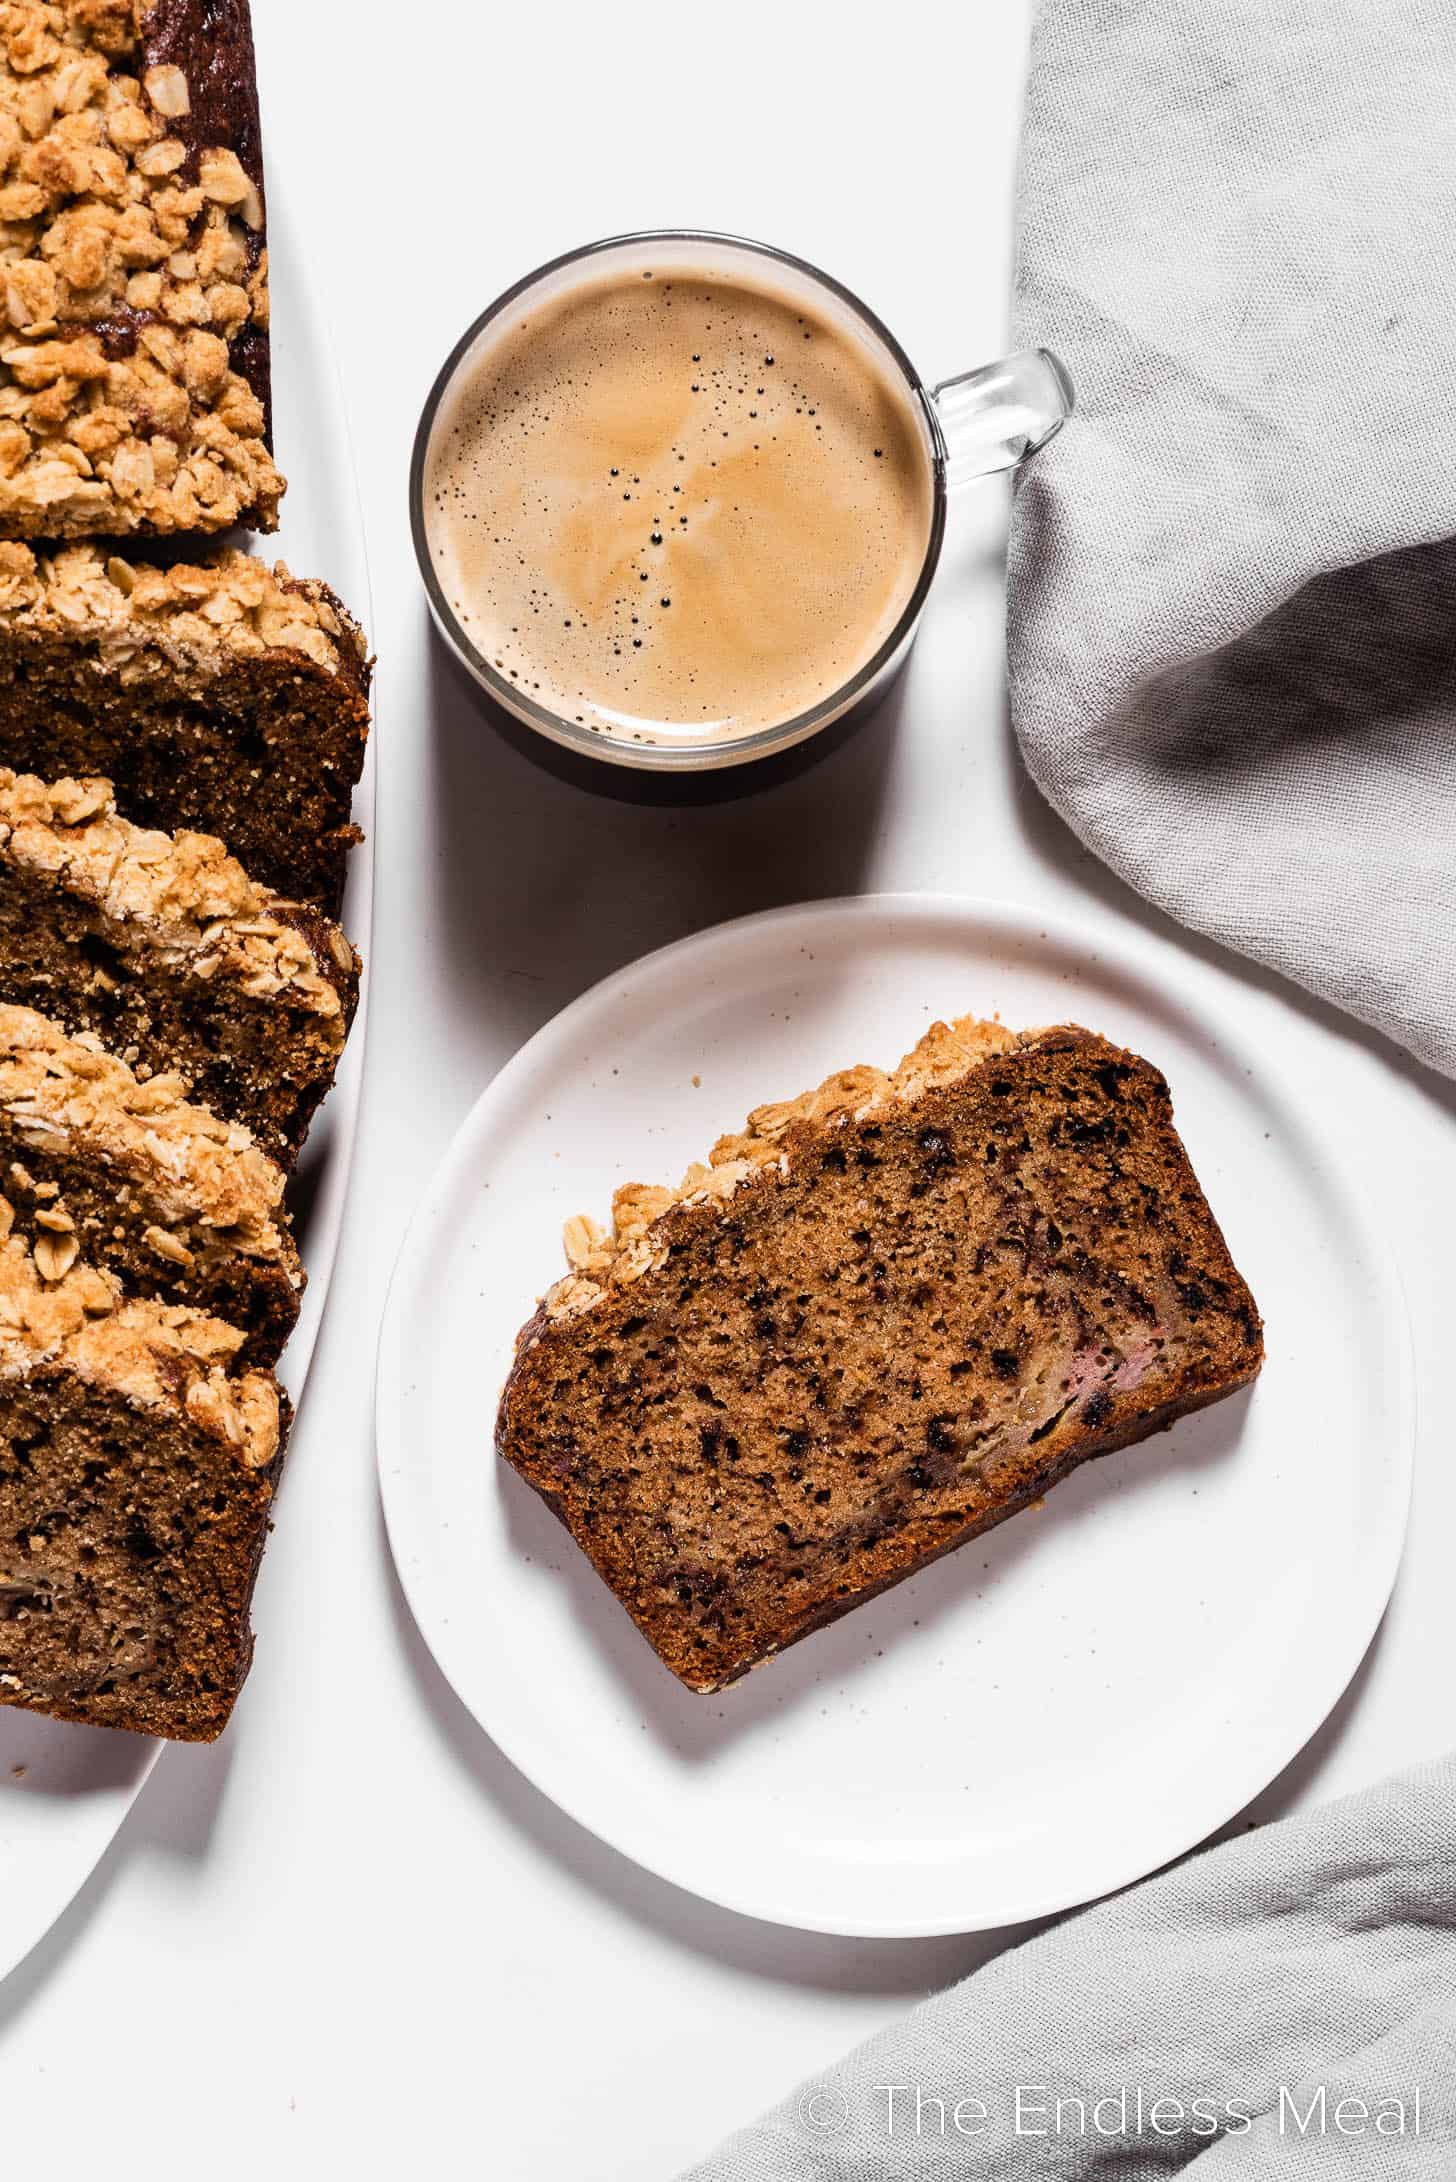 A slice of Coffee Banana Bread next to a cup of coffee